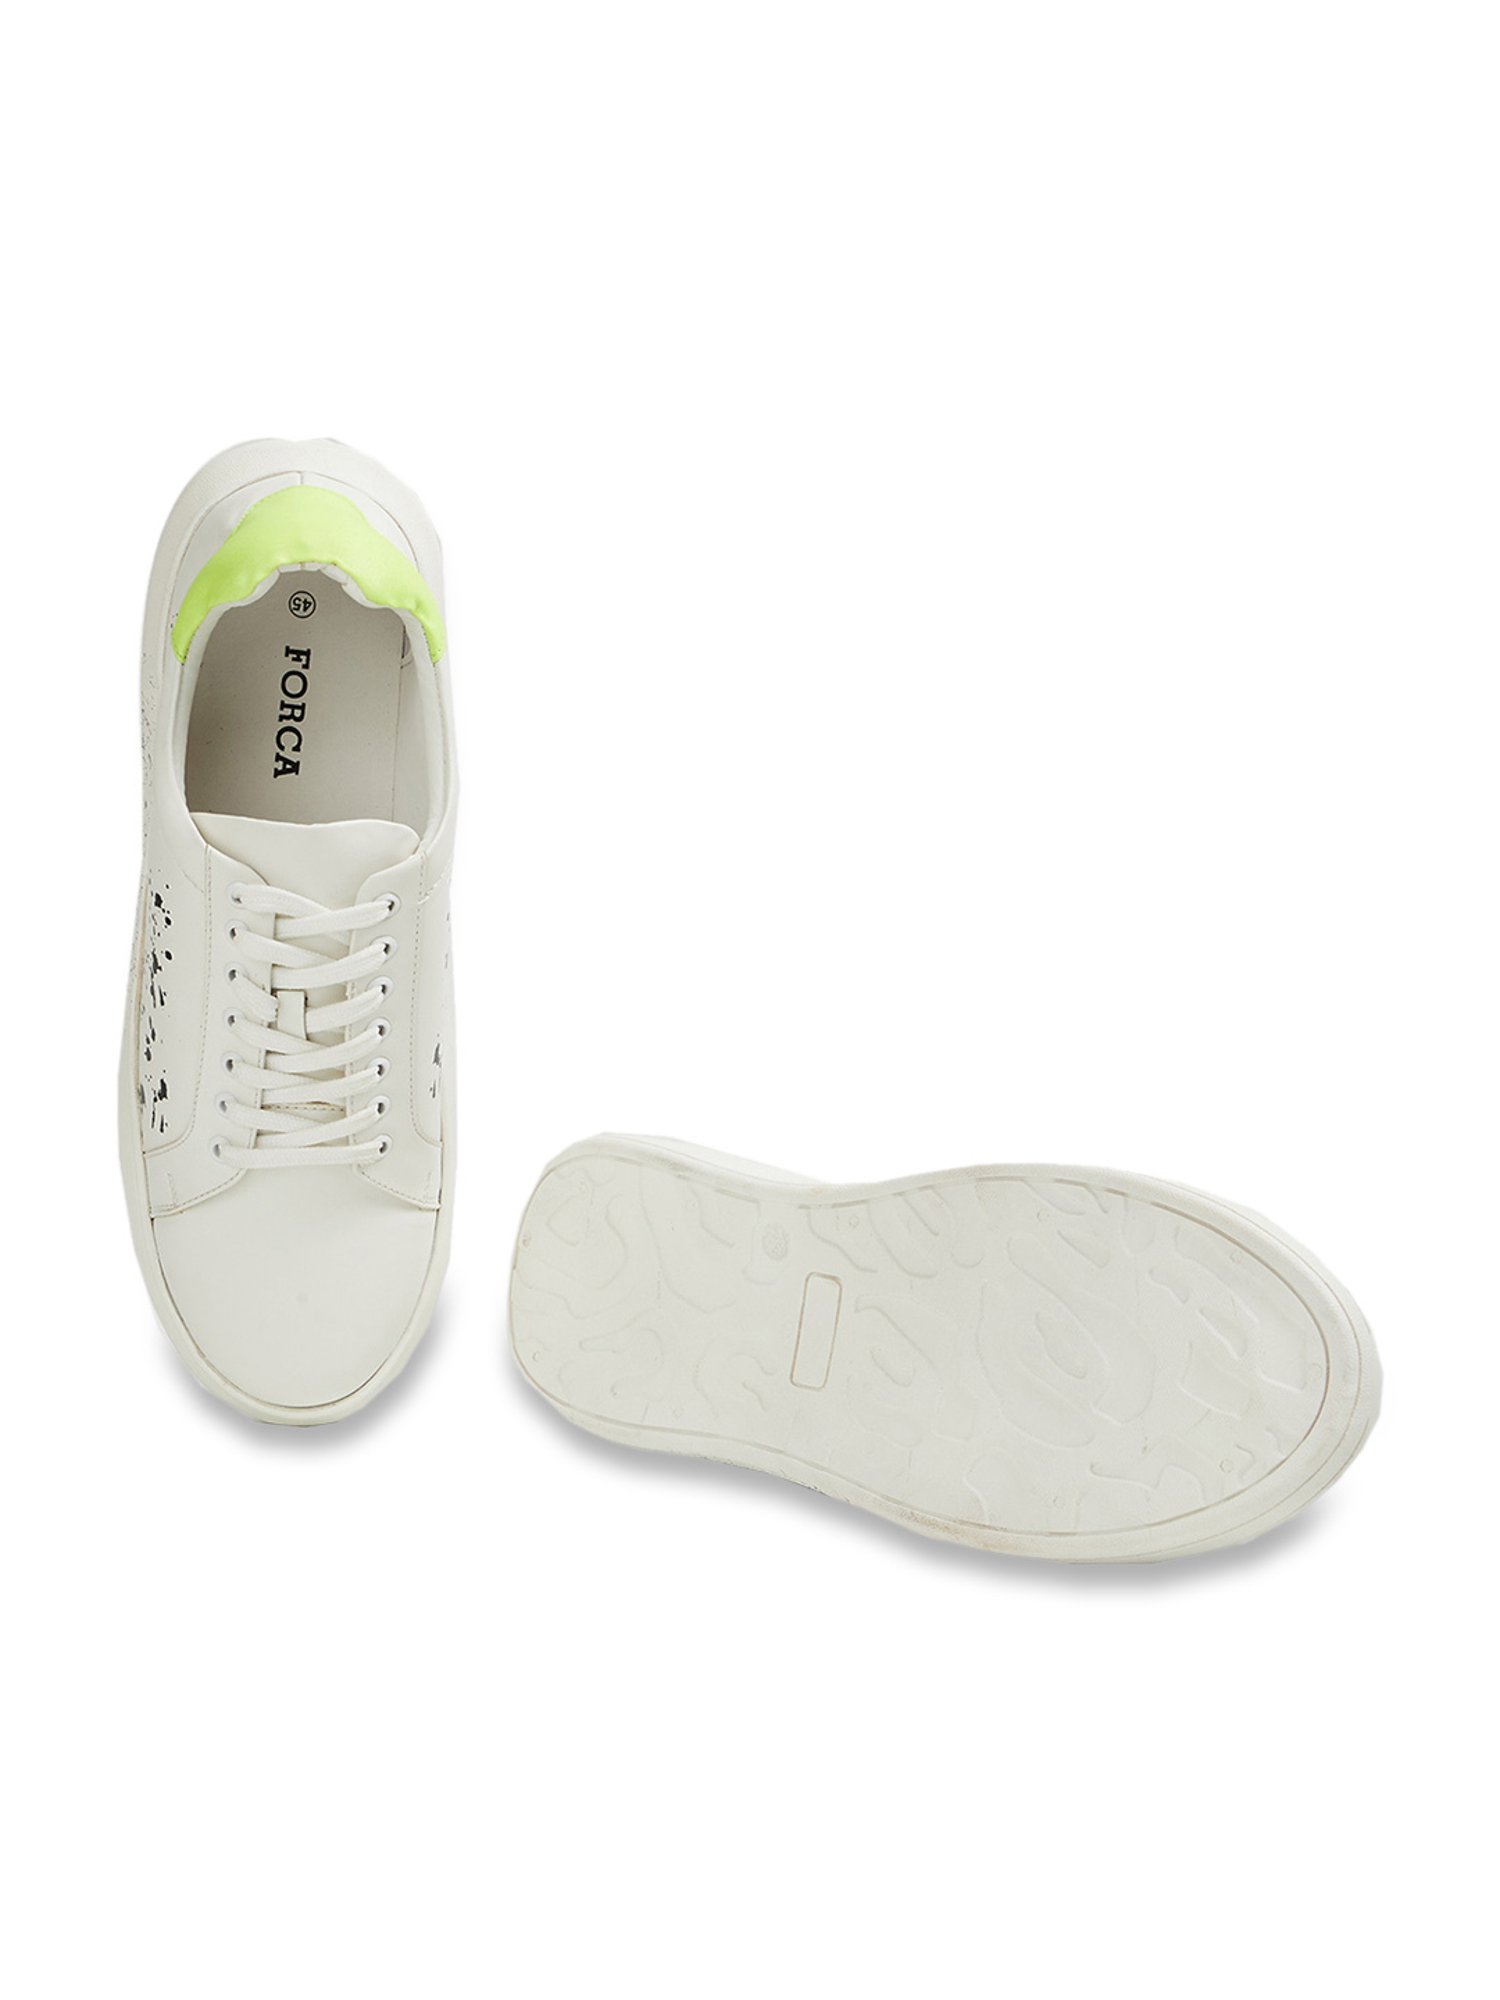 Buy FORCA Forca Men Woven Design Comfort Insole Contrast Sole Sneakers at  Redfynd